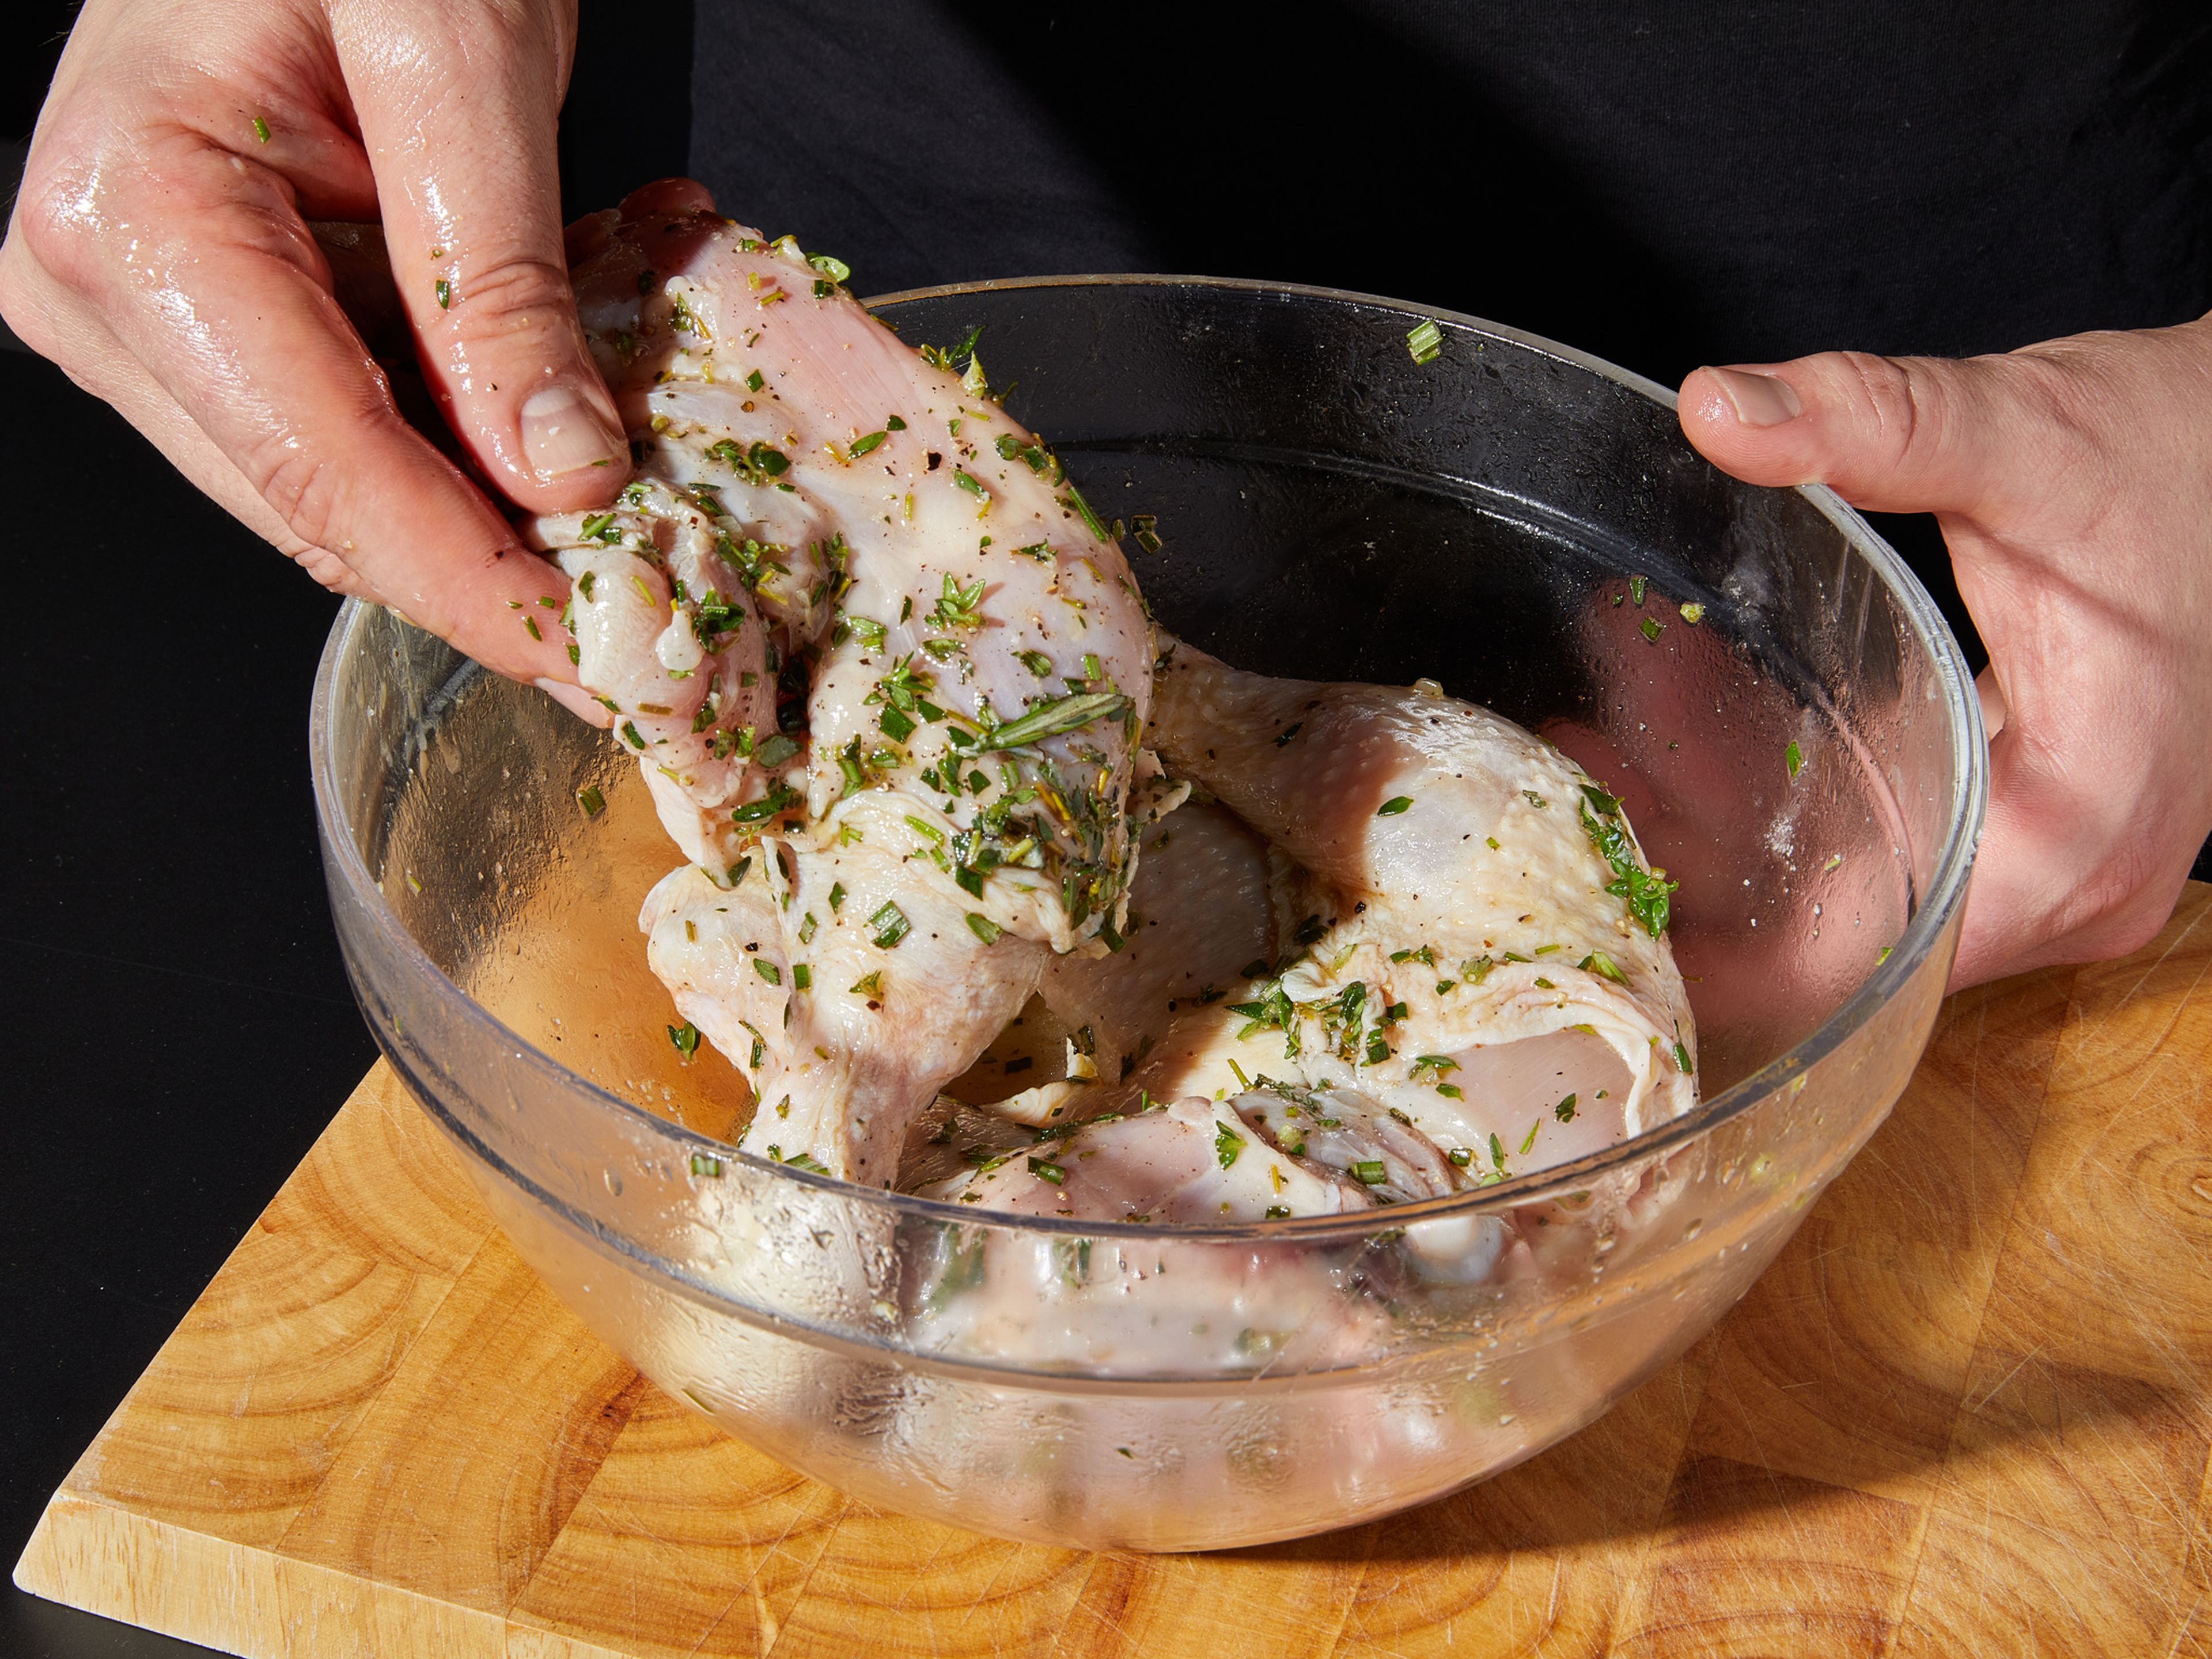 Peel and dice onion and garlic. Remove rosemary and thyme leaves from stems and finely chop. In a large bowl, mix sugar, olive oil, juice of half a lemon, thyme, rosemary, oregano, salt, and pepper. Add chicken and let marinate for approx. 30 min.